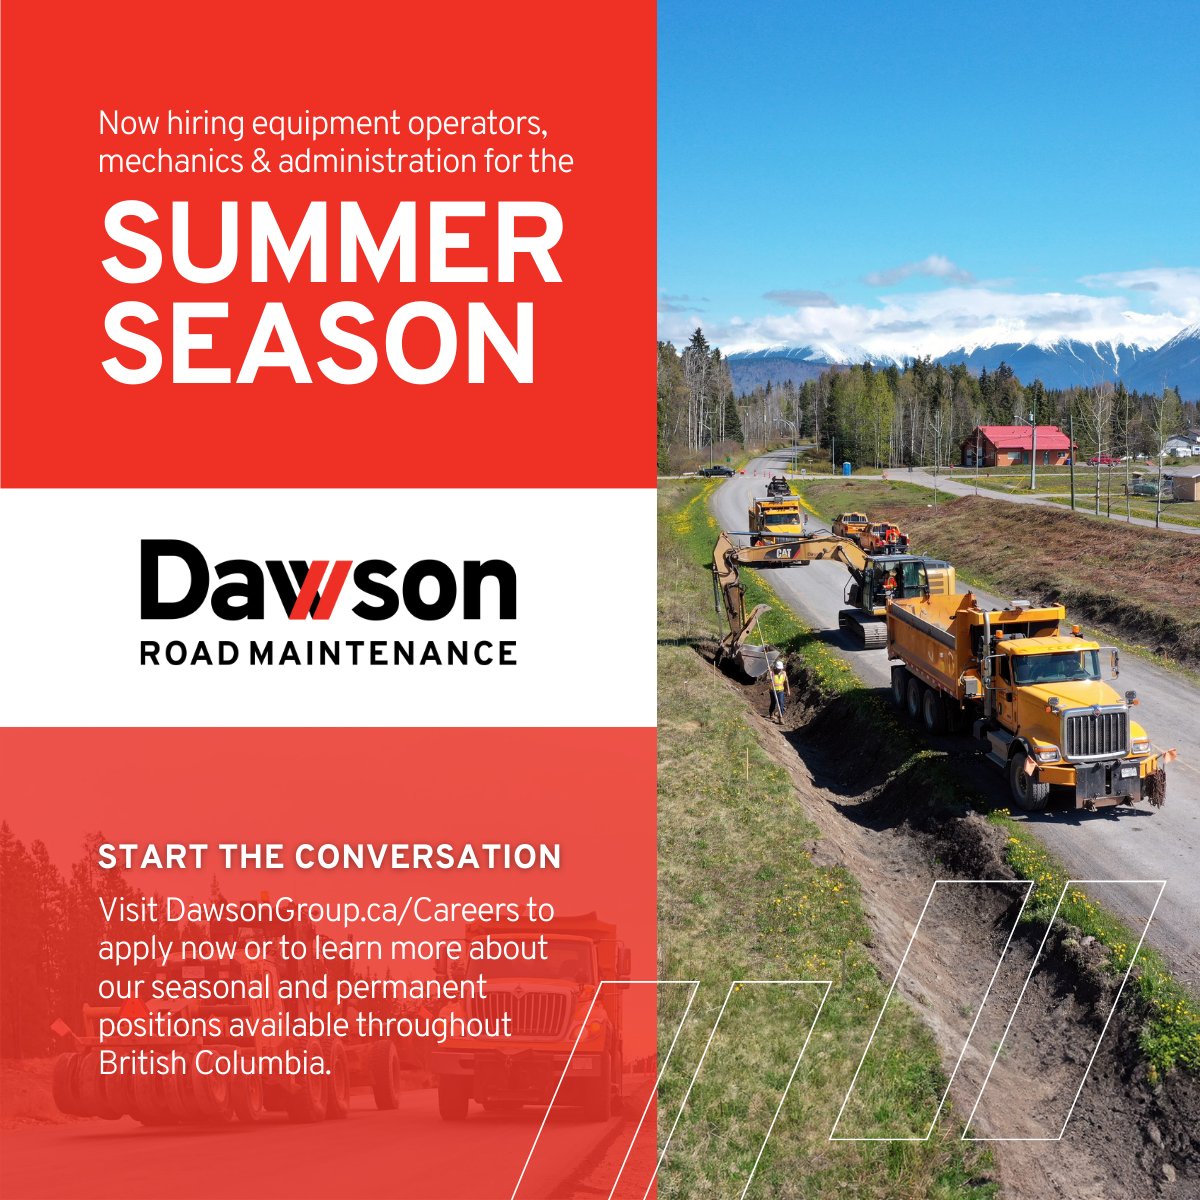 Construction season is right around the corner, and Dawson Road Maintenance is now hiring equipment operators, mechanics, and various administration/management roles. Visit DawsonGroup.ca/Careers to apply now. #DawsonCareers #CareerPlanning #WorkBC #BCjobs #Hiring #BC